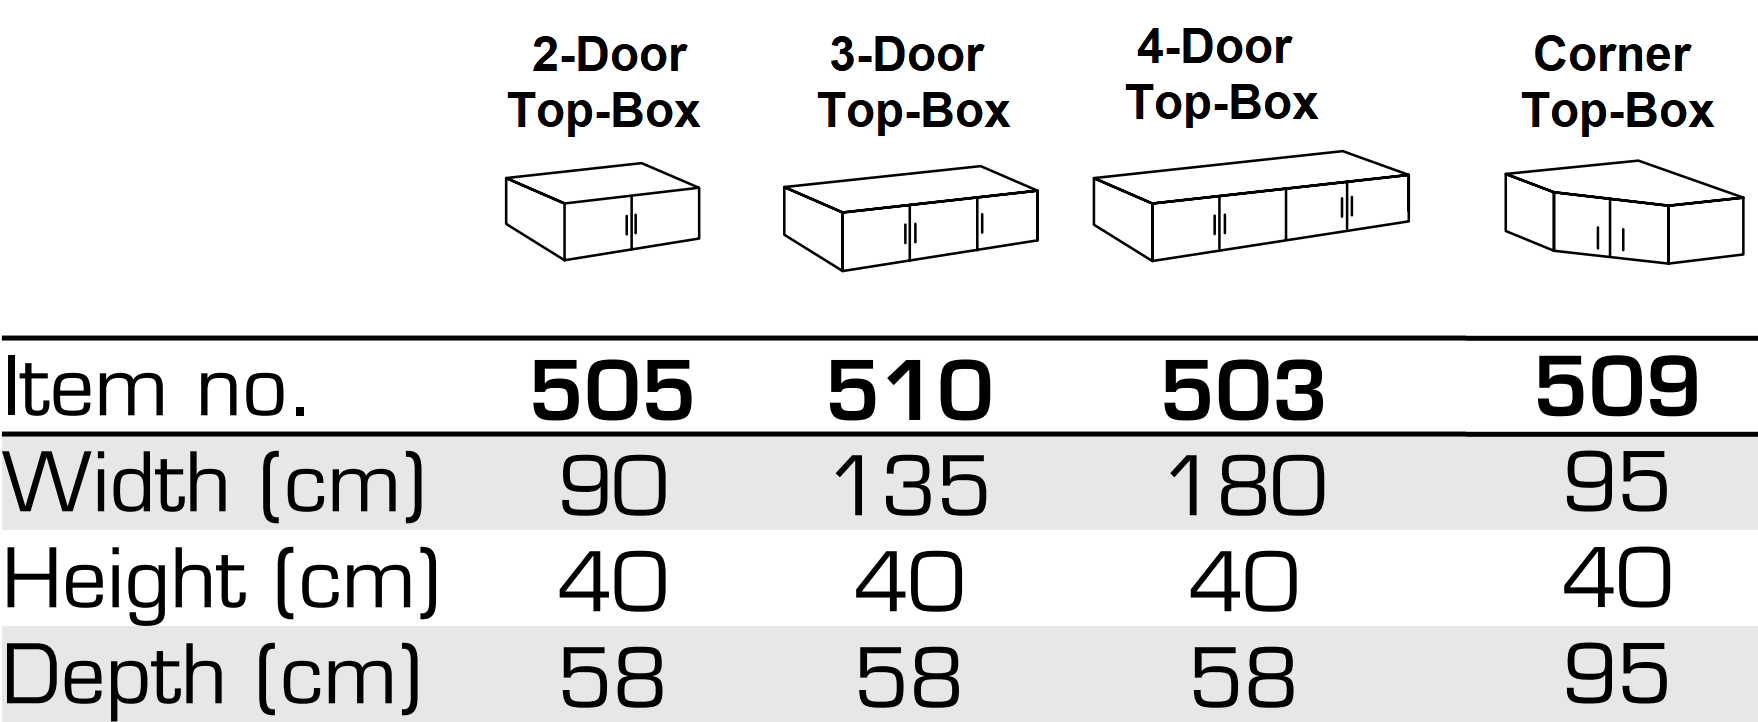 space top box dimensions